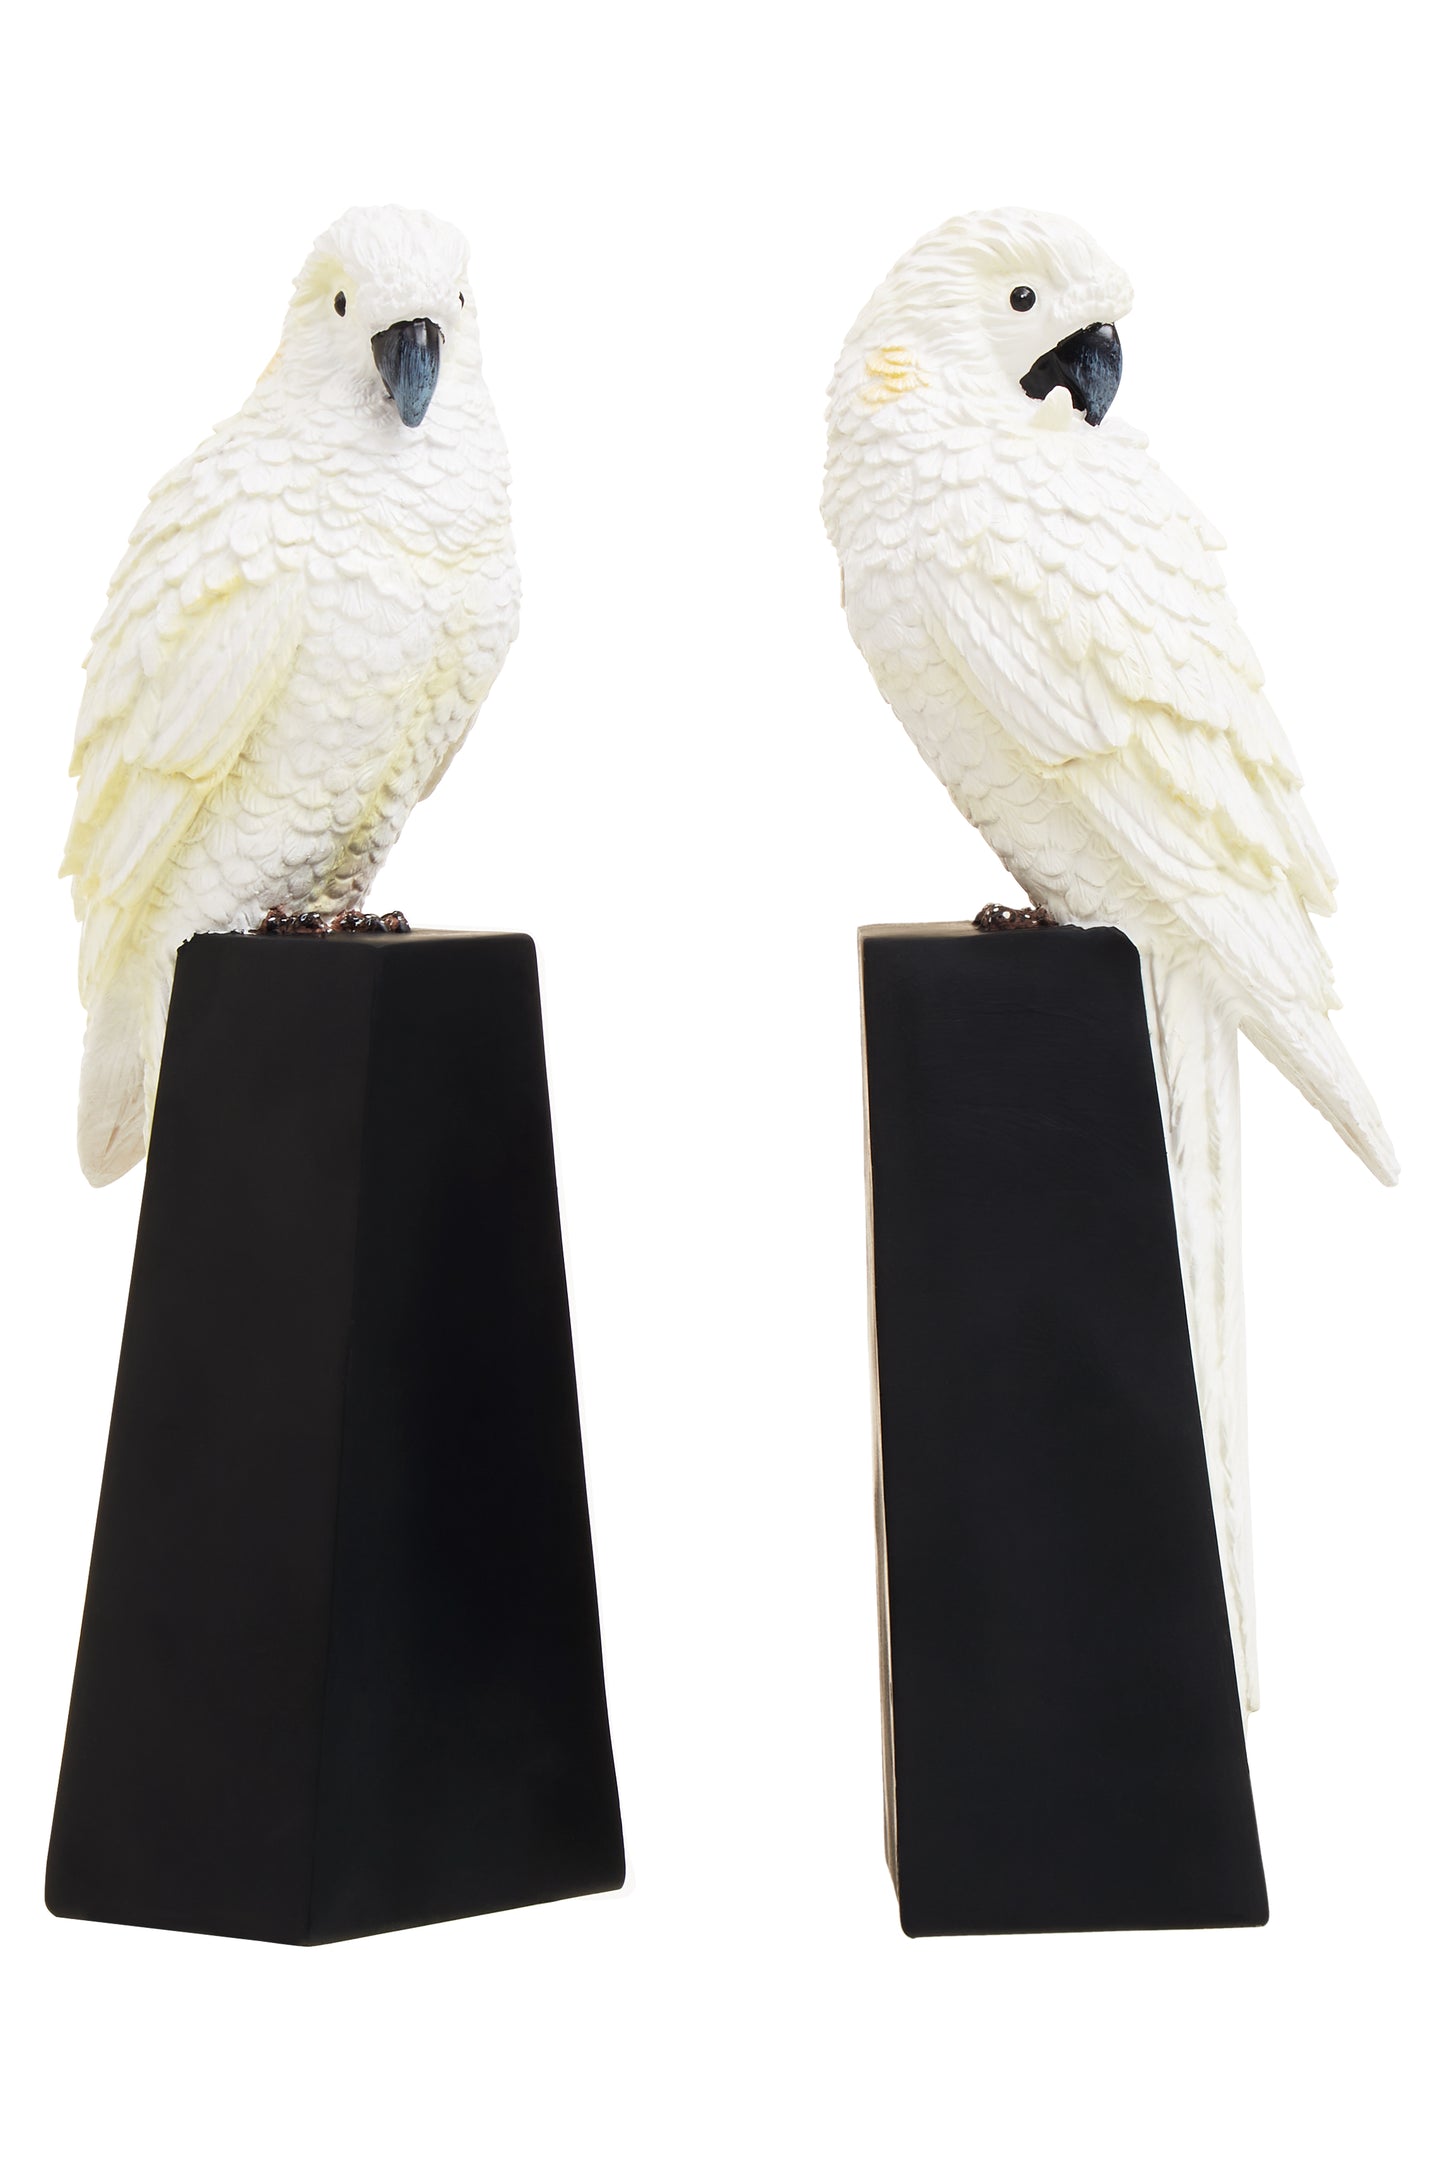 The Pretty Polly Bookends, 41cm, White, Black & Yellow